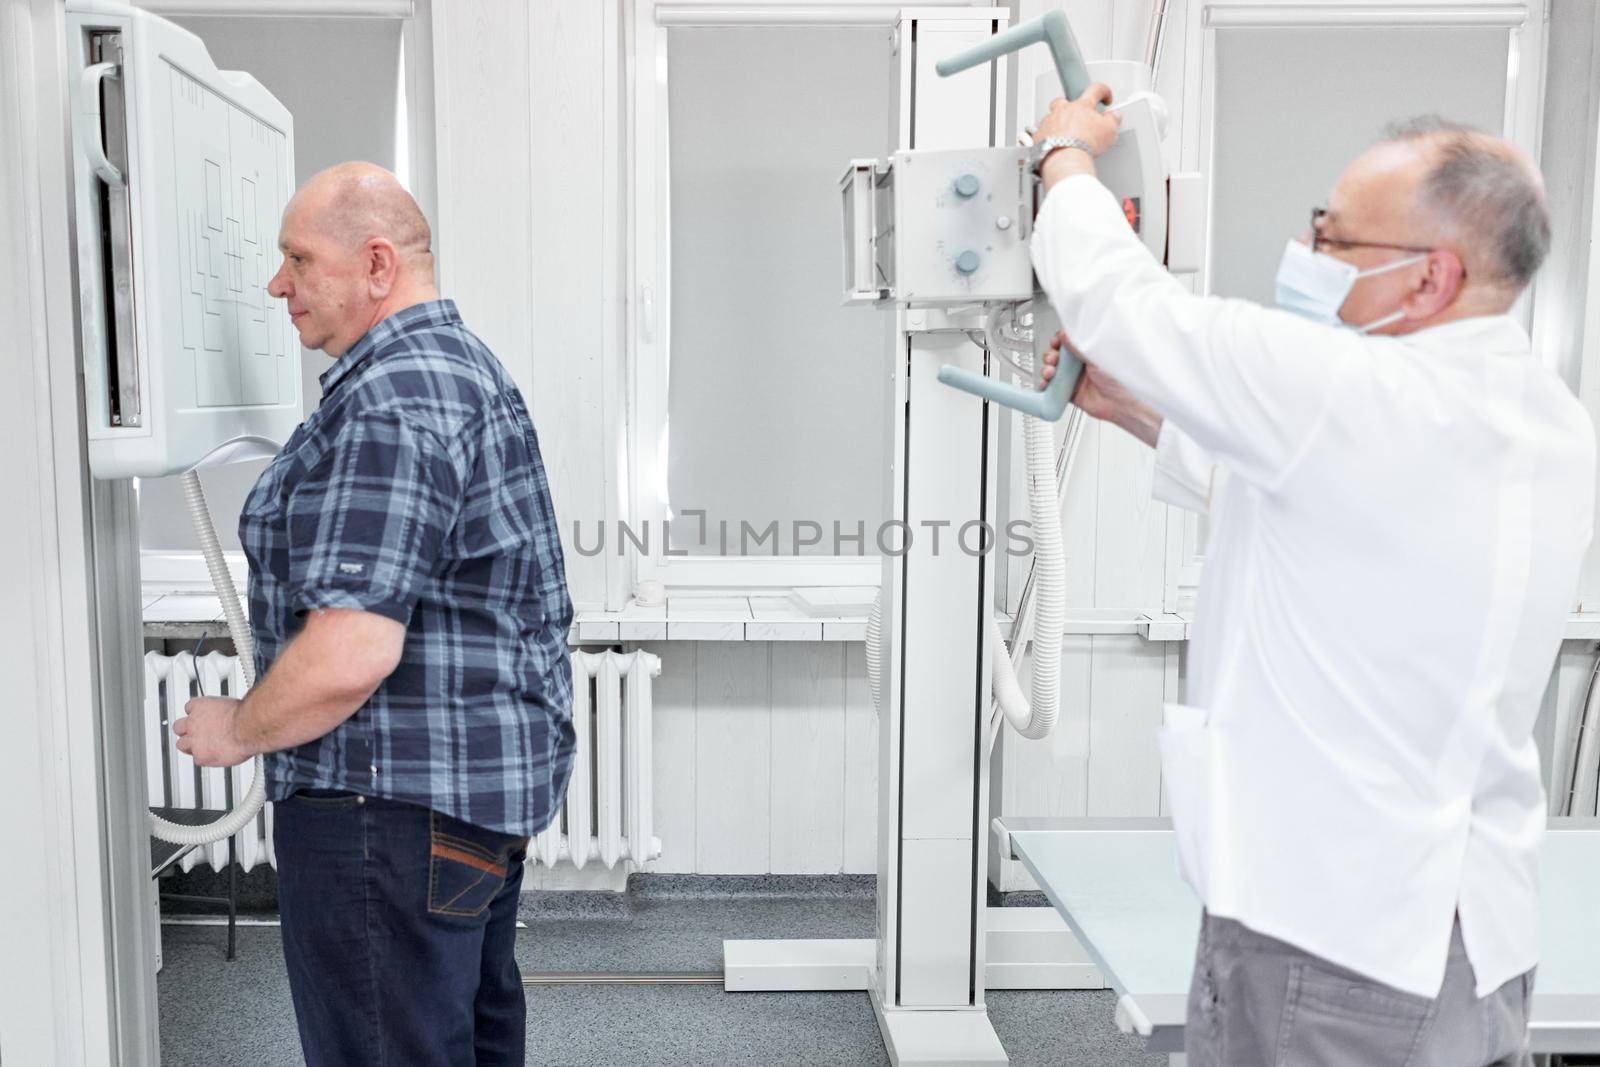 Doctor and patient using a x-ray machine in a hospital room by WesternExoticStockers